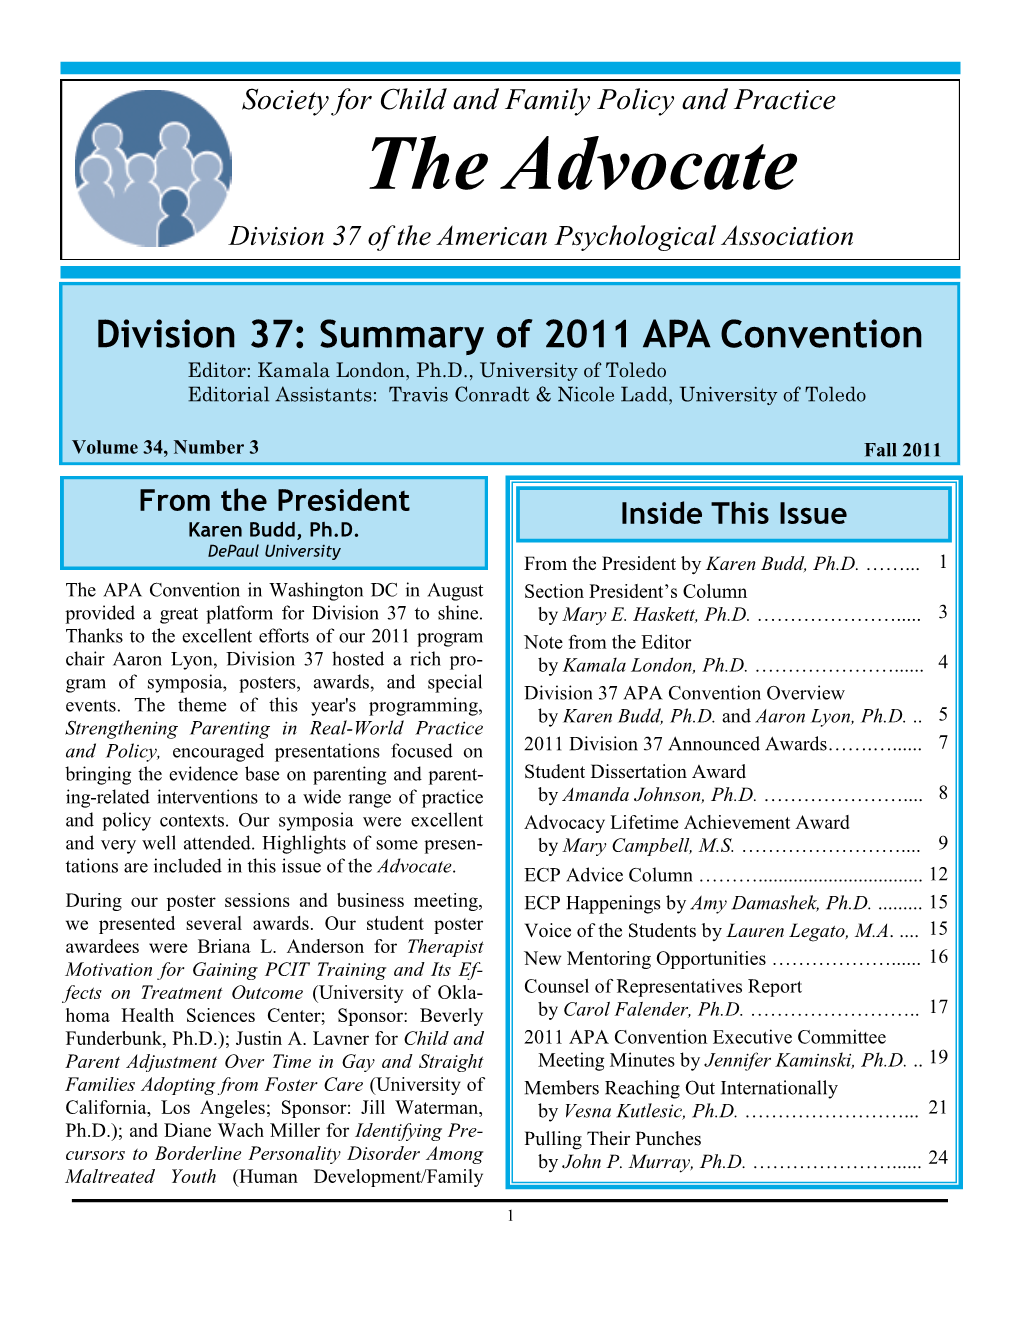 The Advocate Division 37 of the American Psychological Association